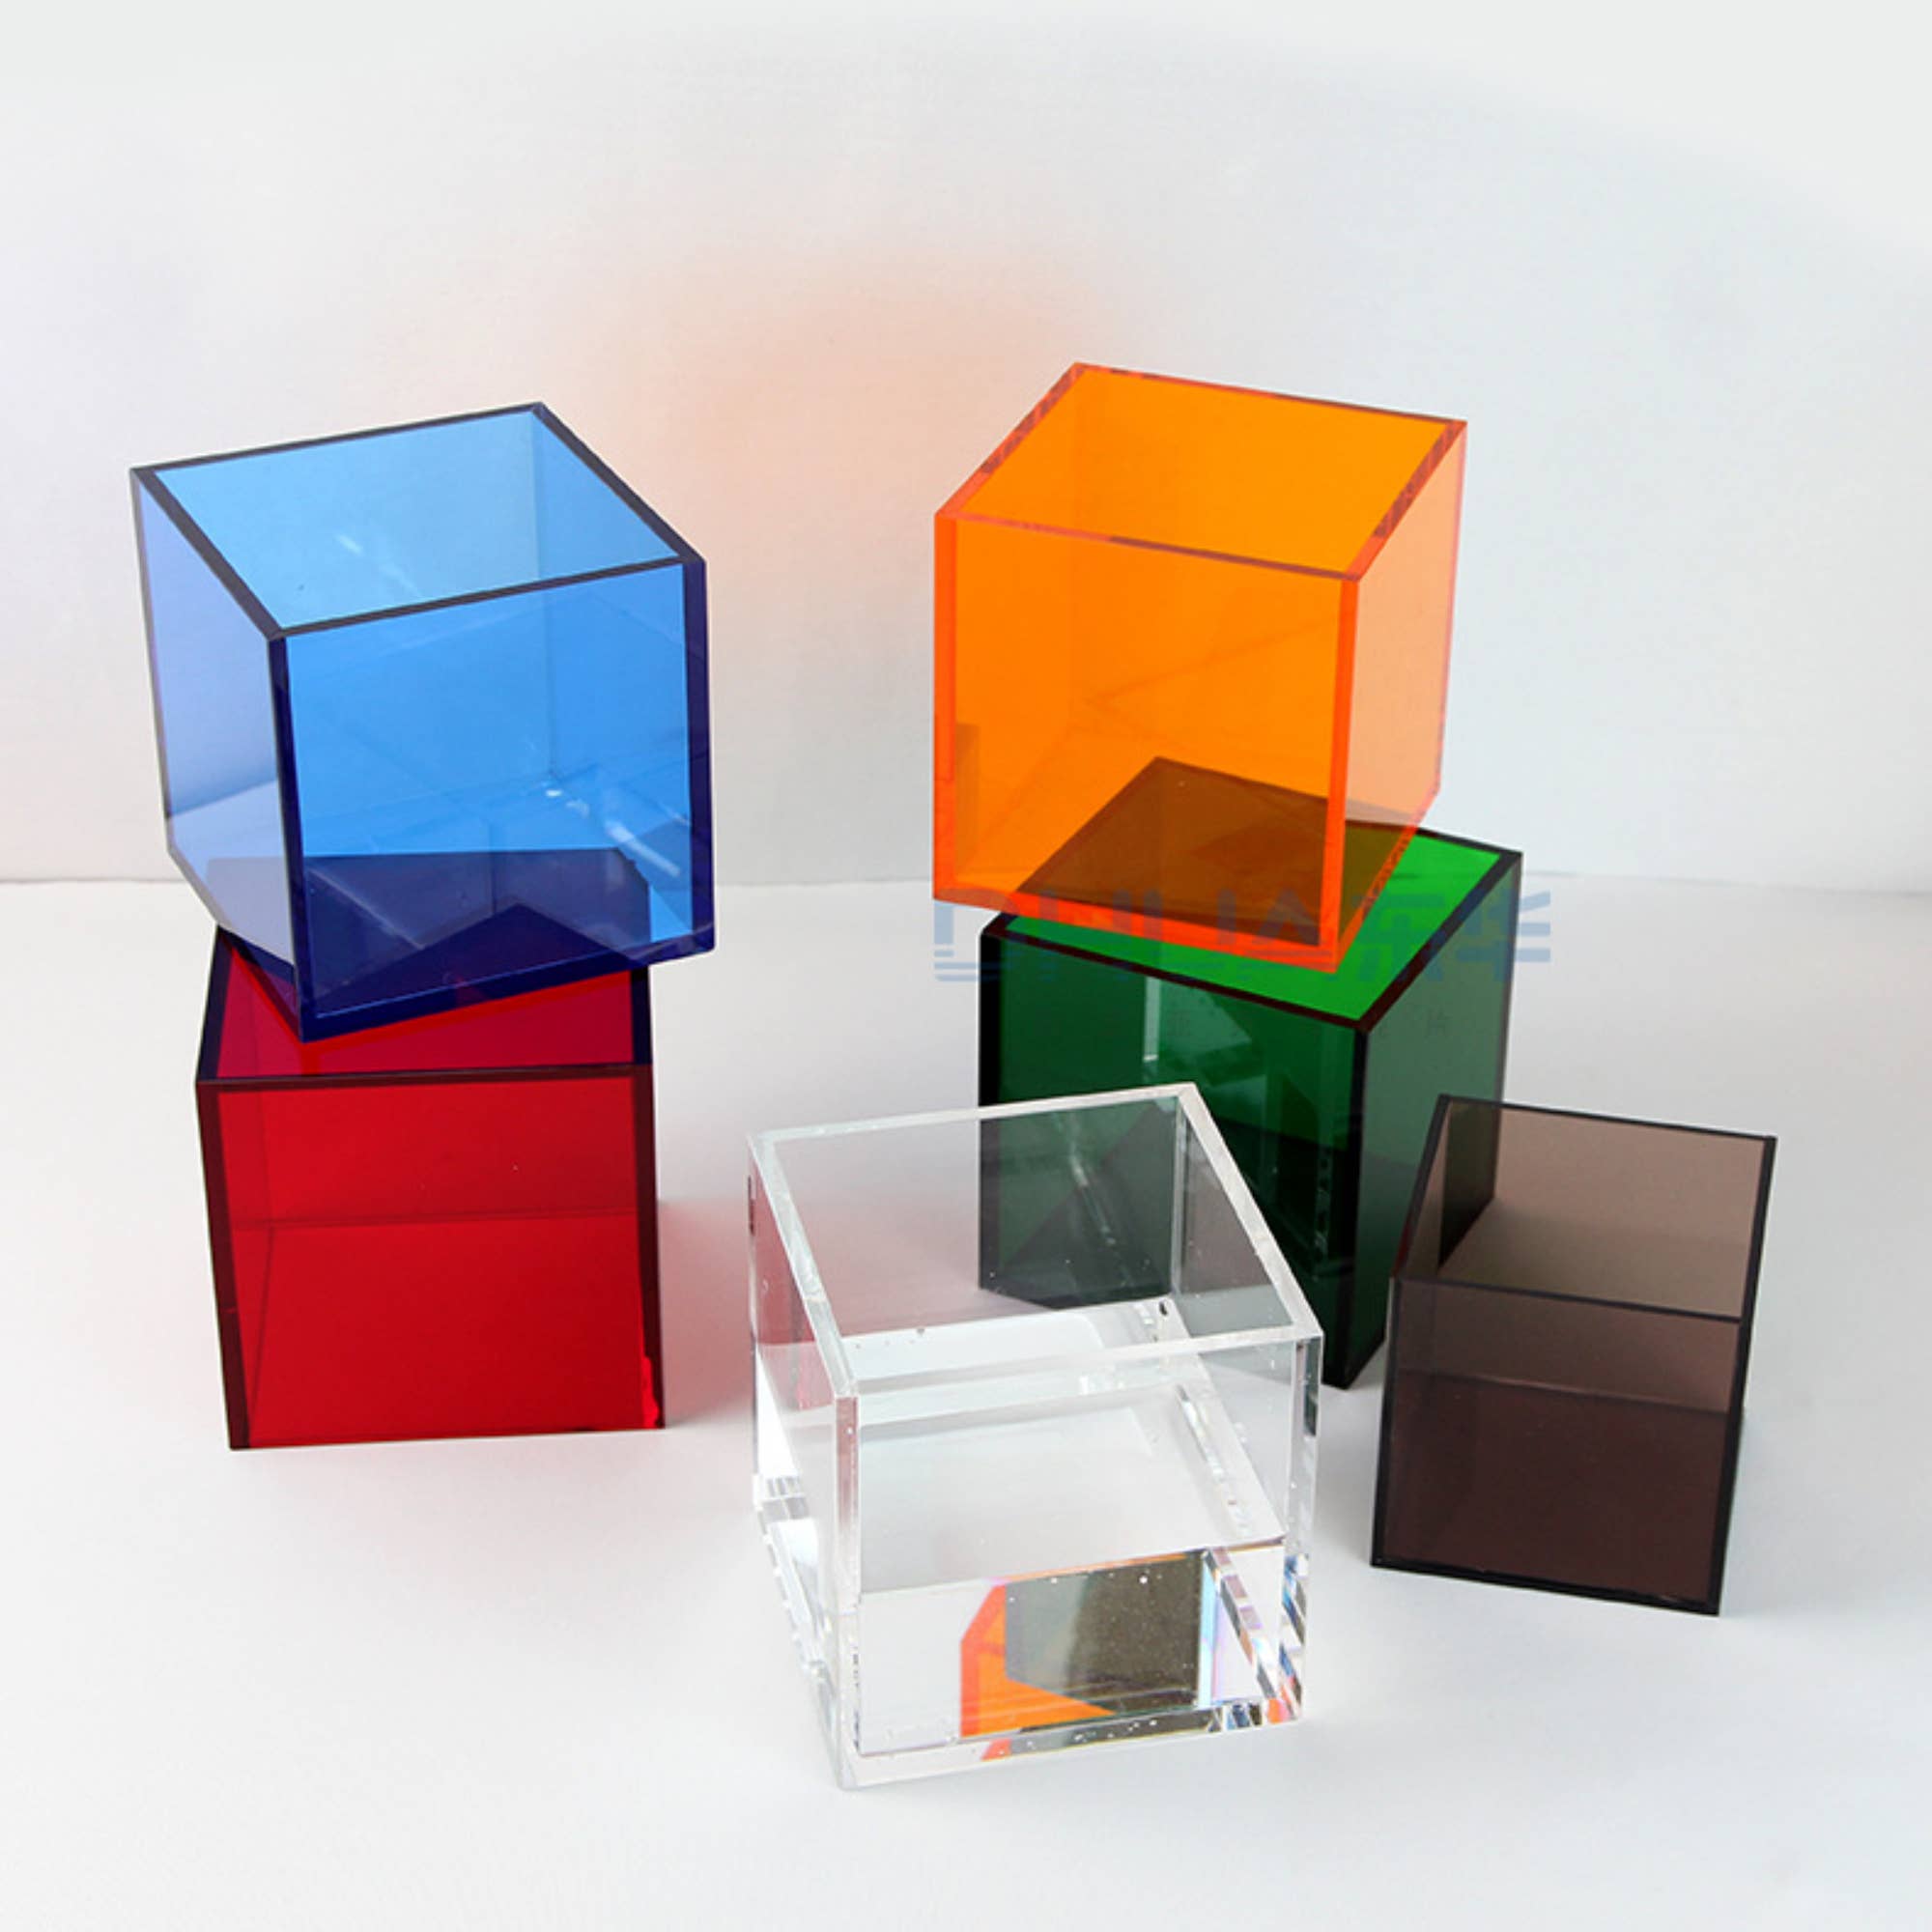 Clear Acrylic Boxes Round 4.75X2 8 Pack